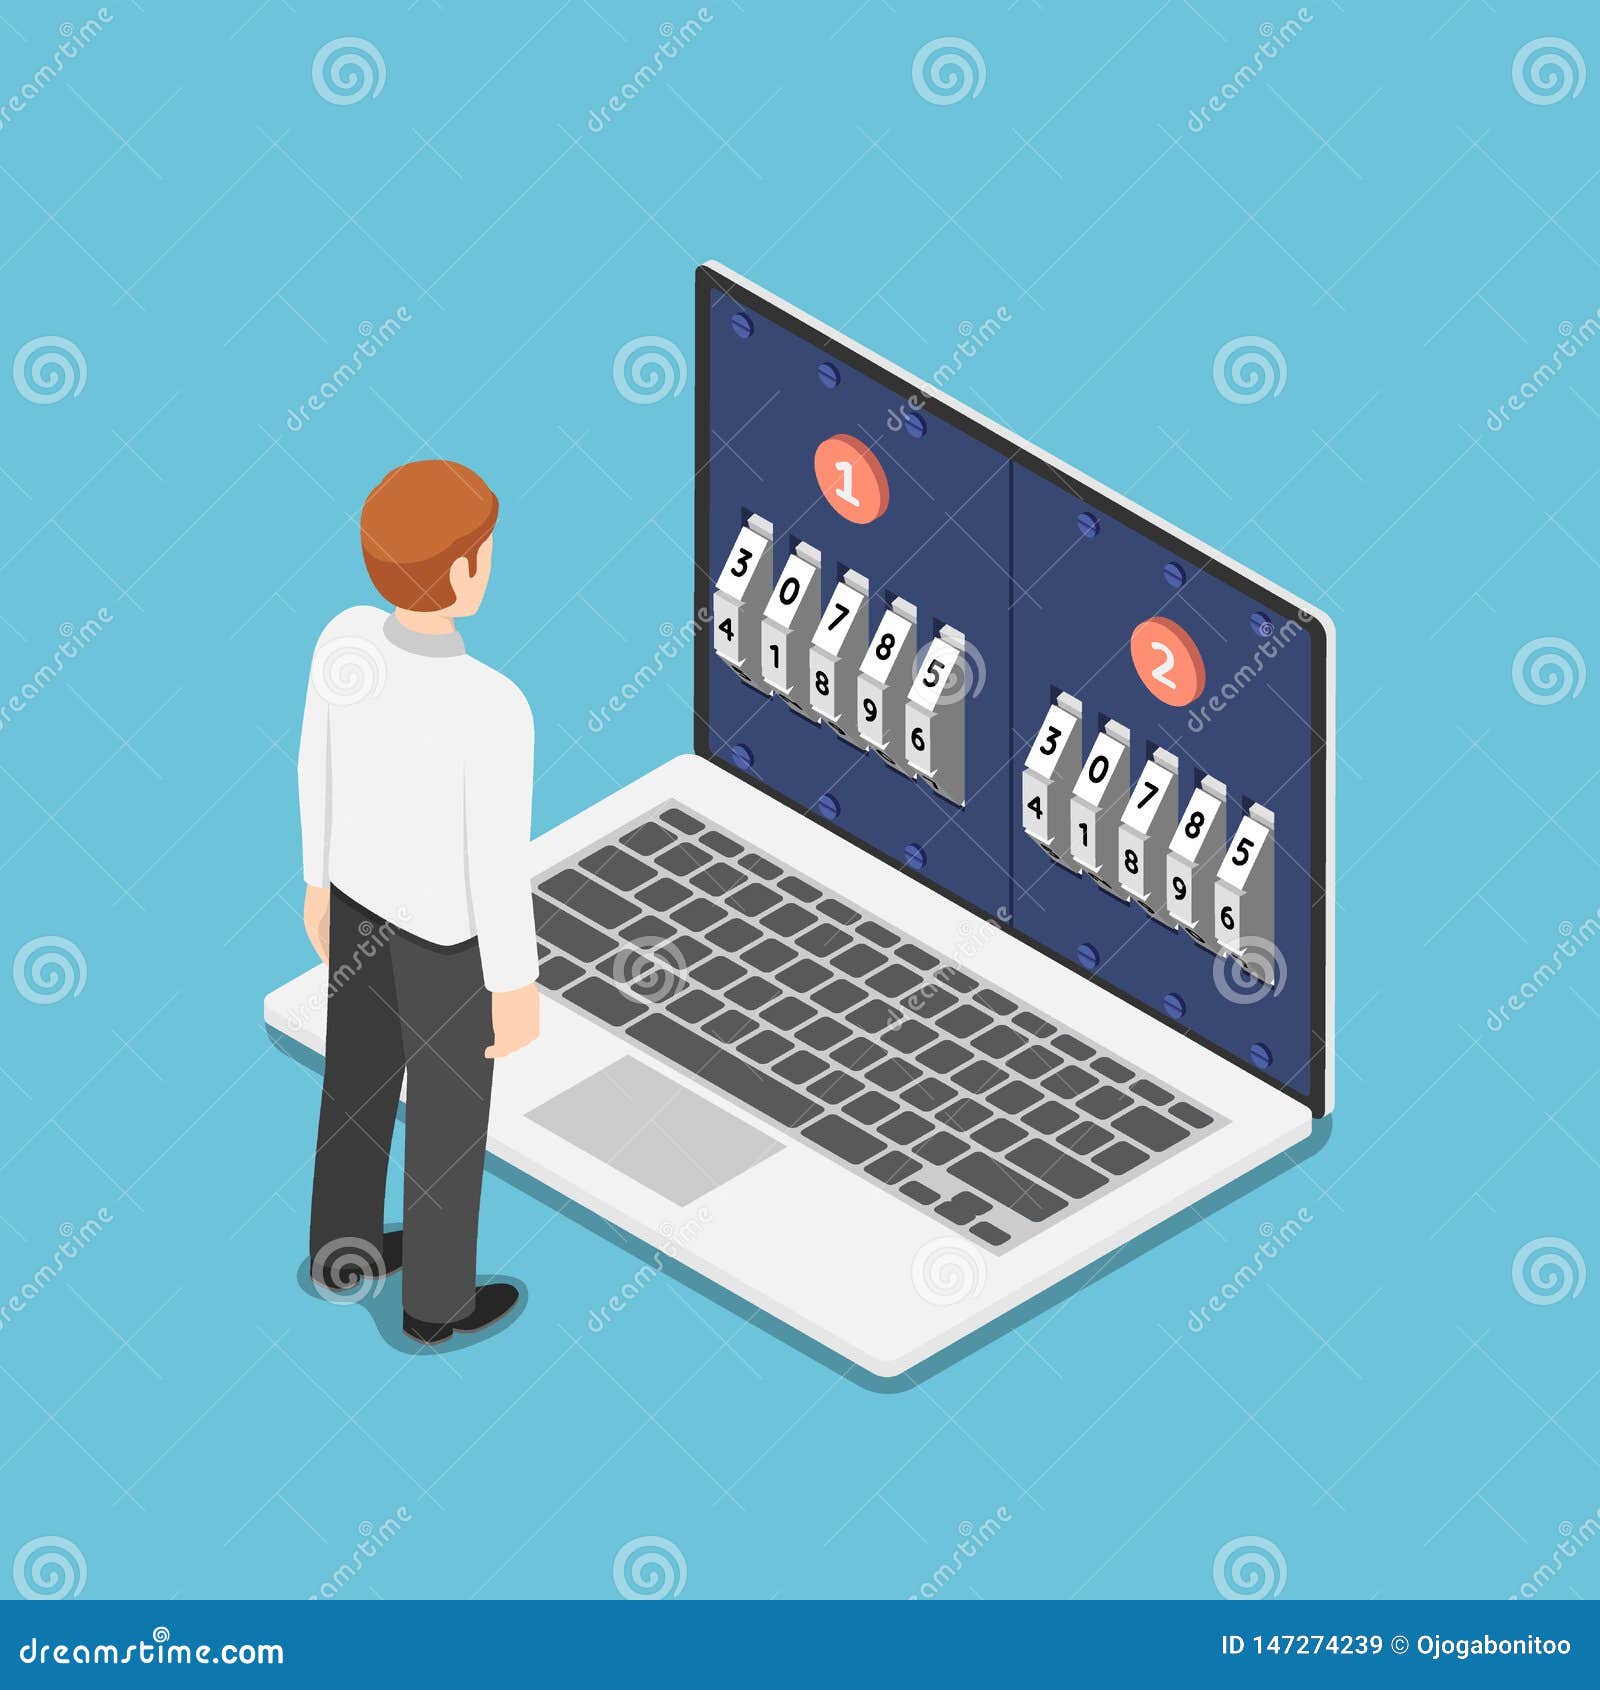 isometric businessman standing in front of laptop with two step password verification